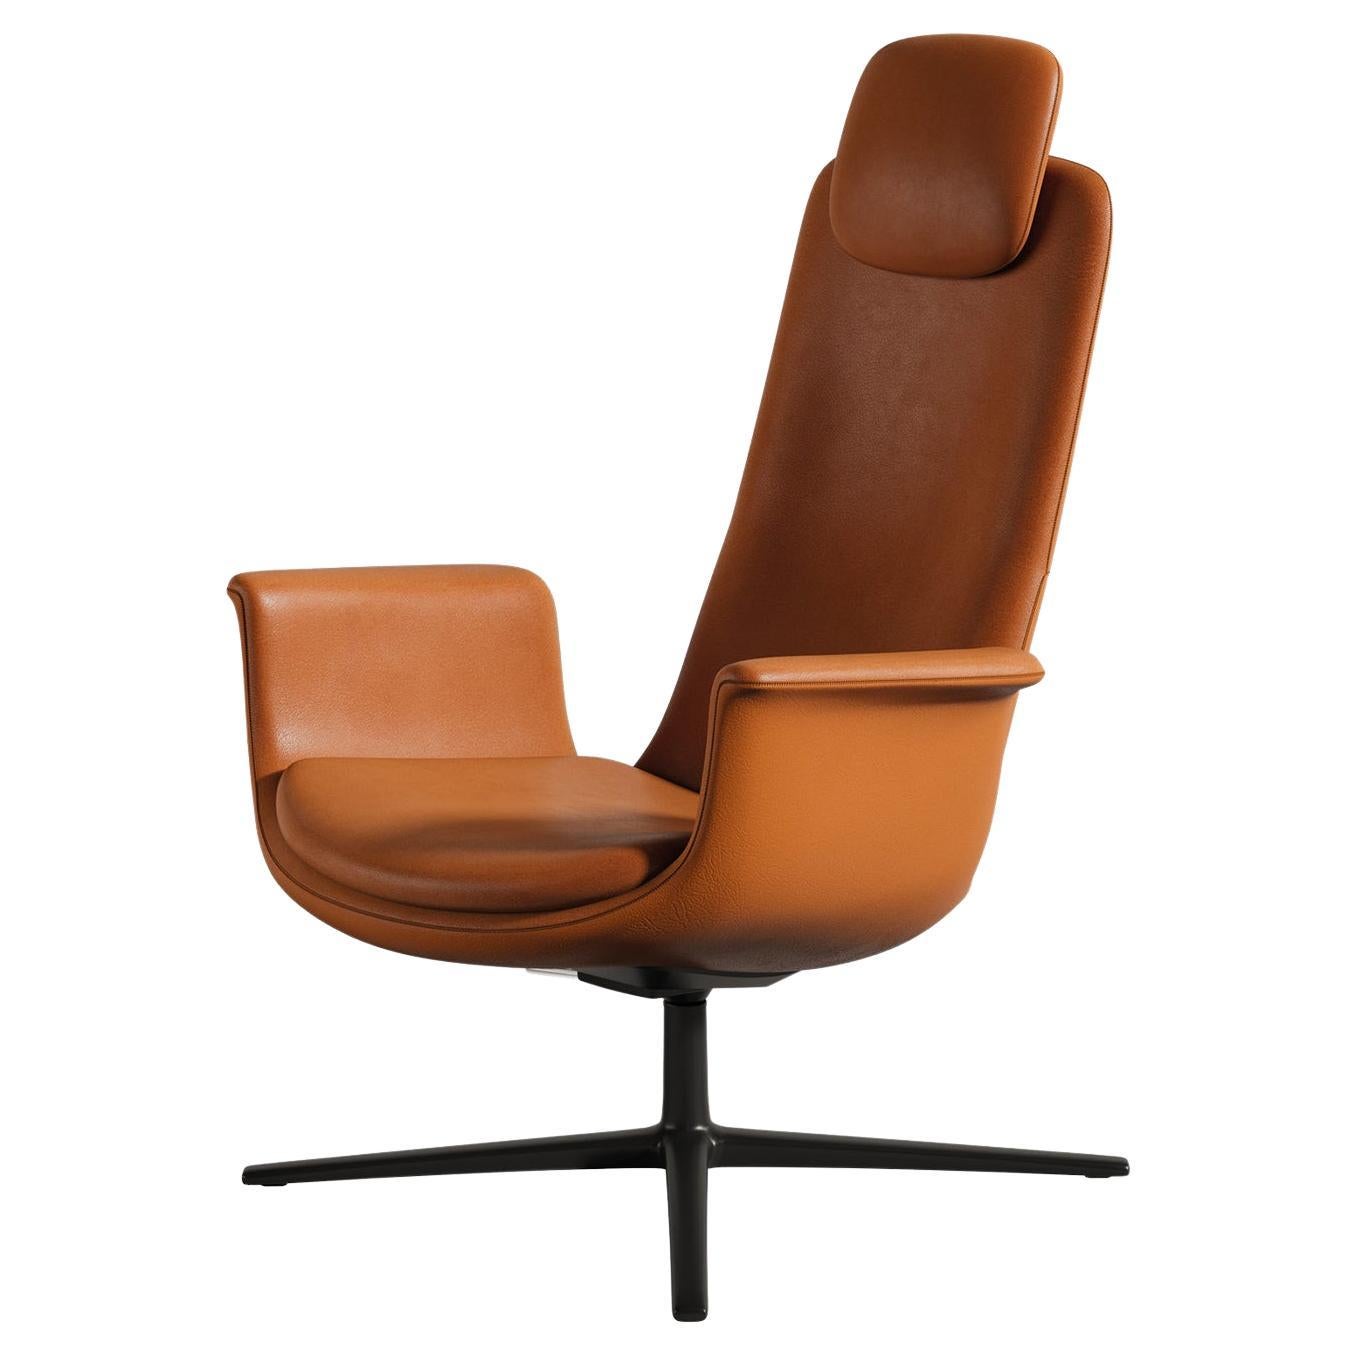 Contemporay Armchair, Office Chair, Club chair "Odyssey" brown leather 